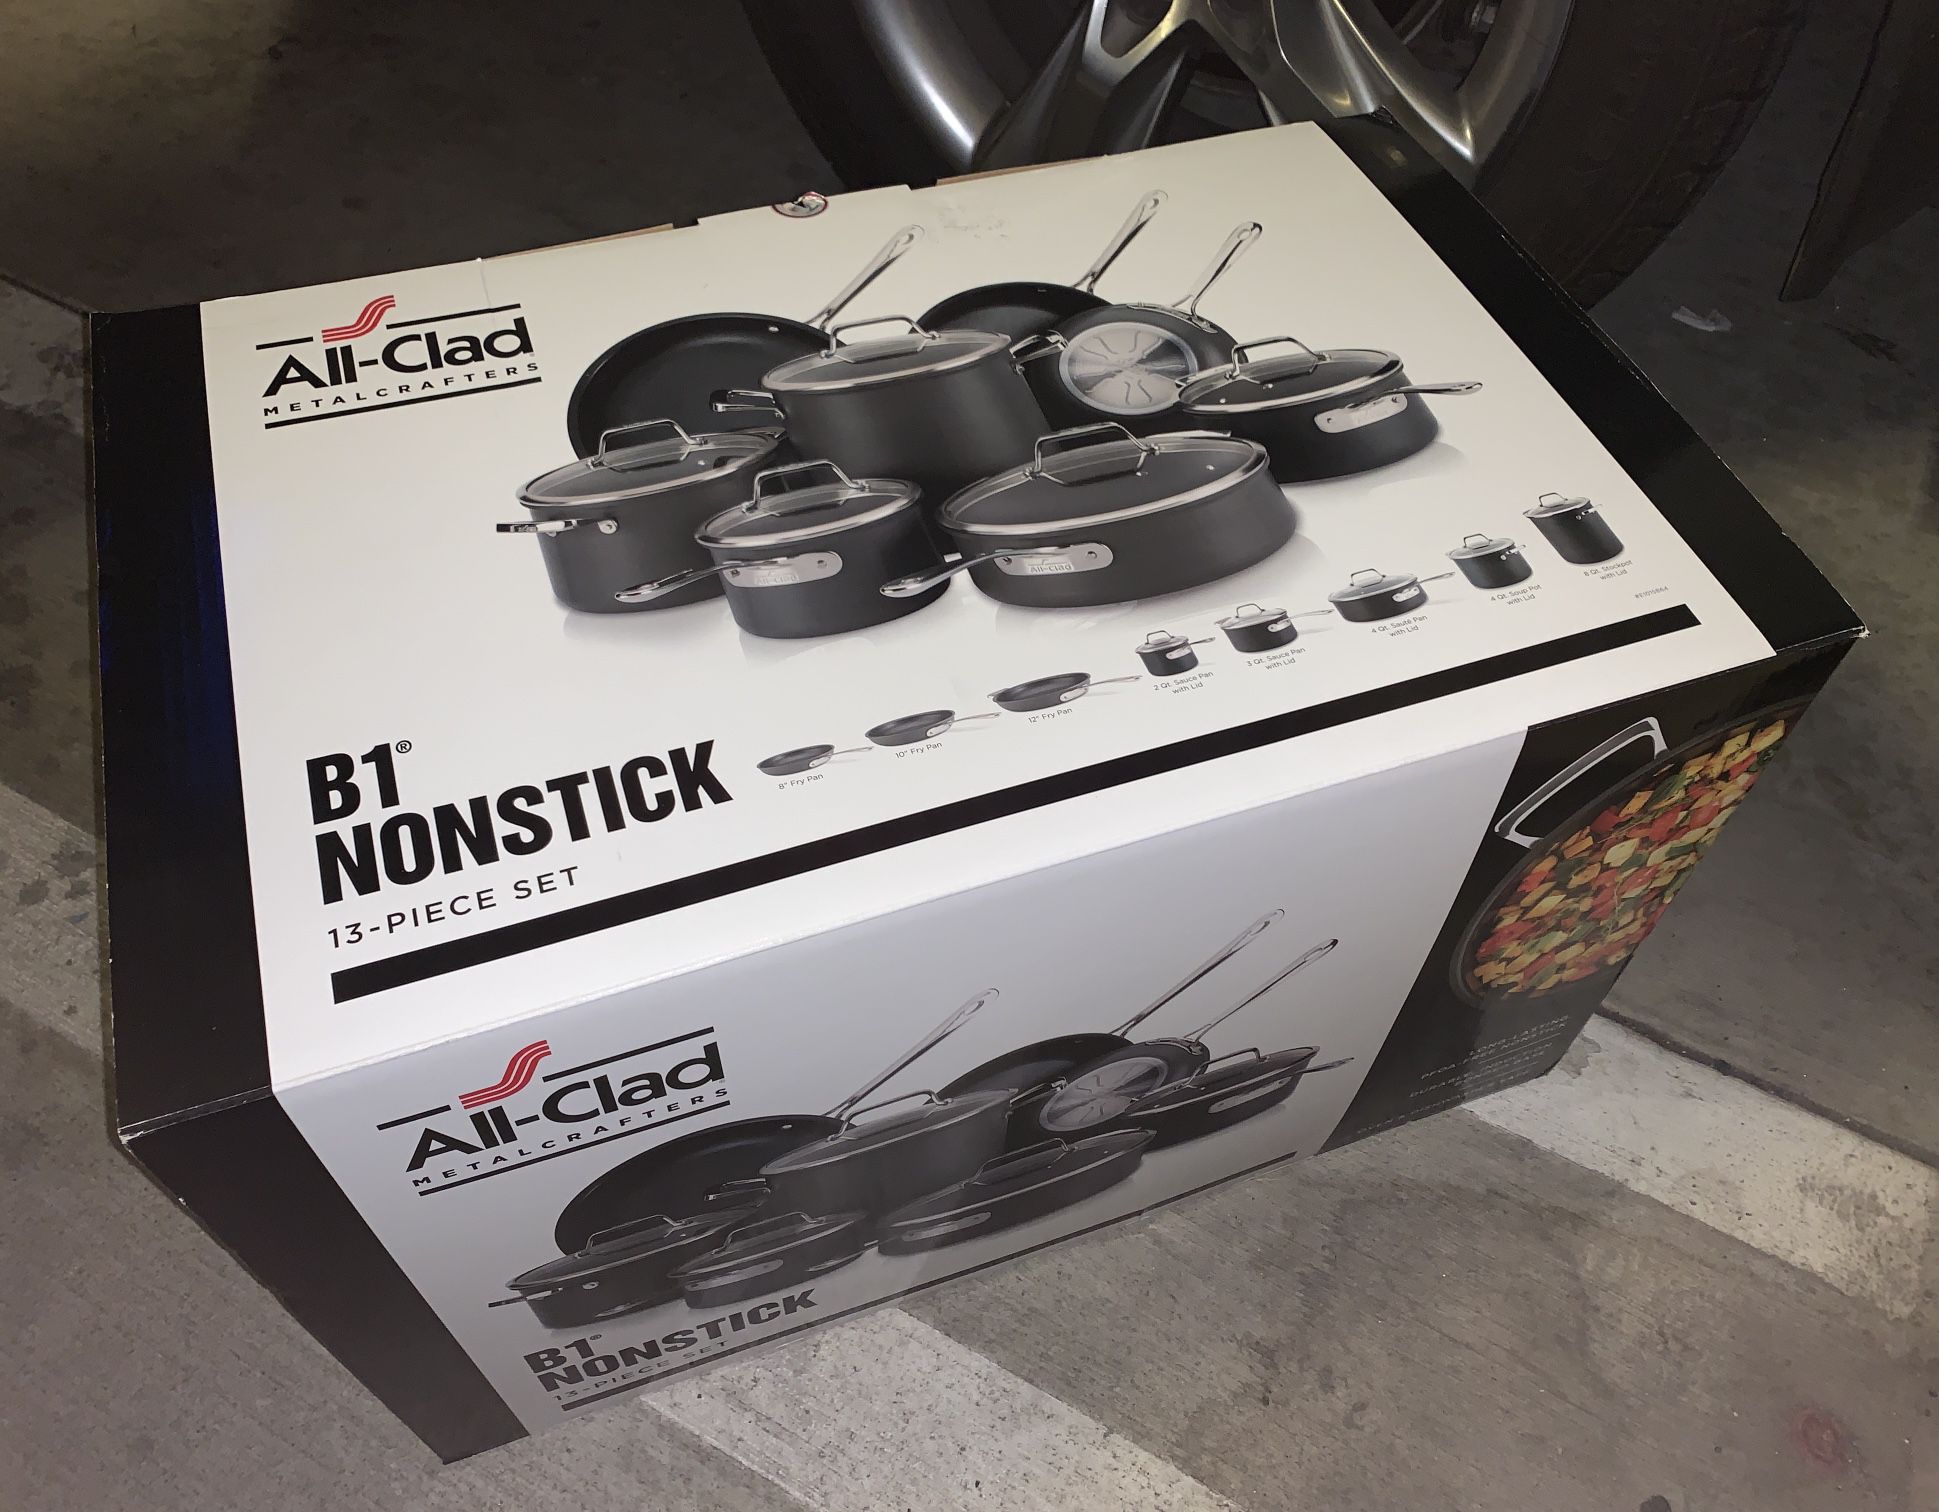 New Sealed All-Clad B1 Nonstick Hard Anodized Cookware Set - 13 Piece -FIRM  PRICE for Sale in Anaheim, CA - OfferUp